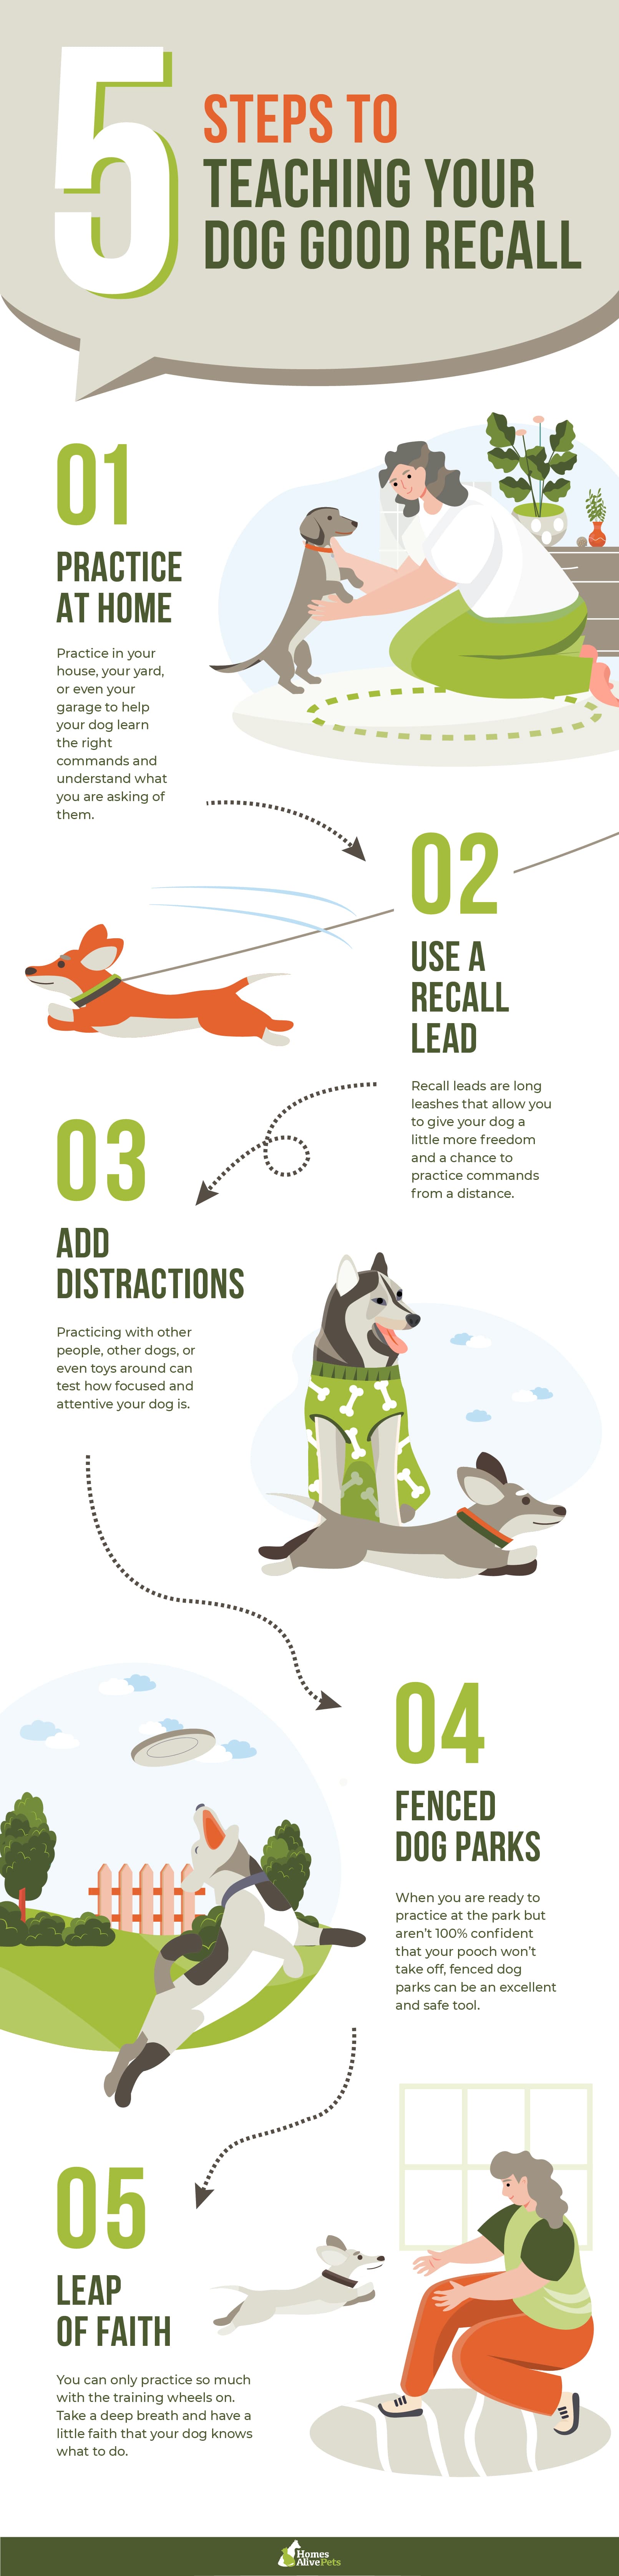 5 Steps to Teaching Your Dog Good Recall Infographic